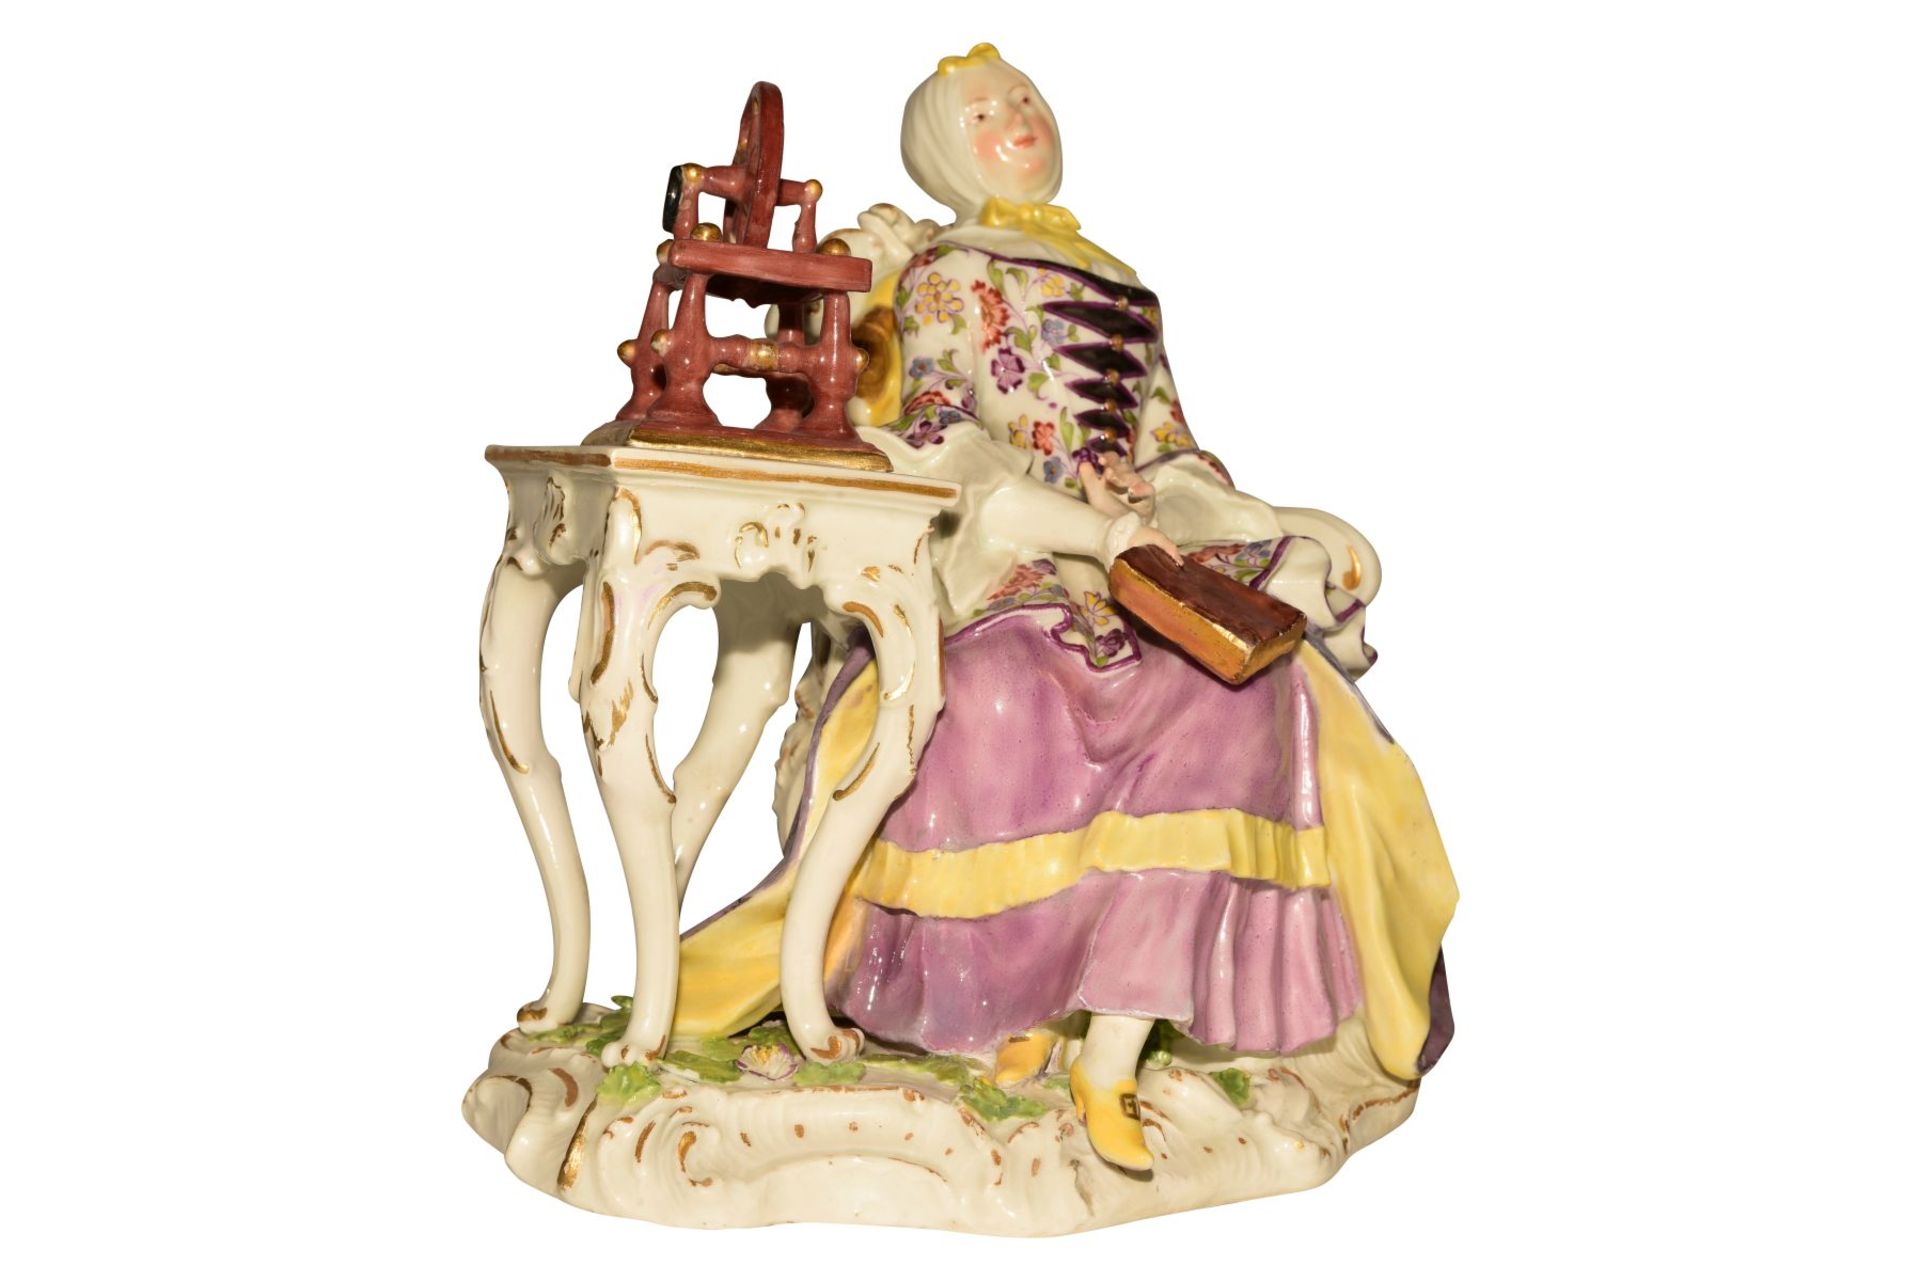 Lady with Spinning Wheel Meissen around 1750 - Image 9 of 10